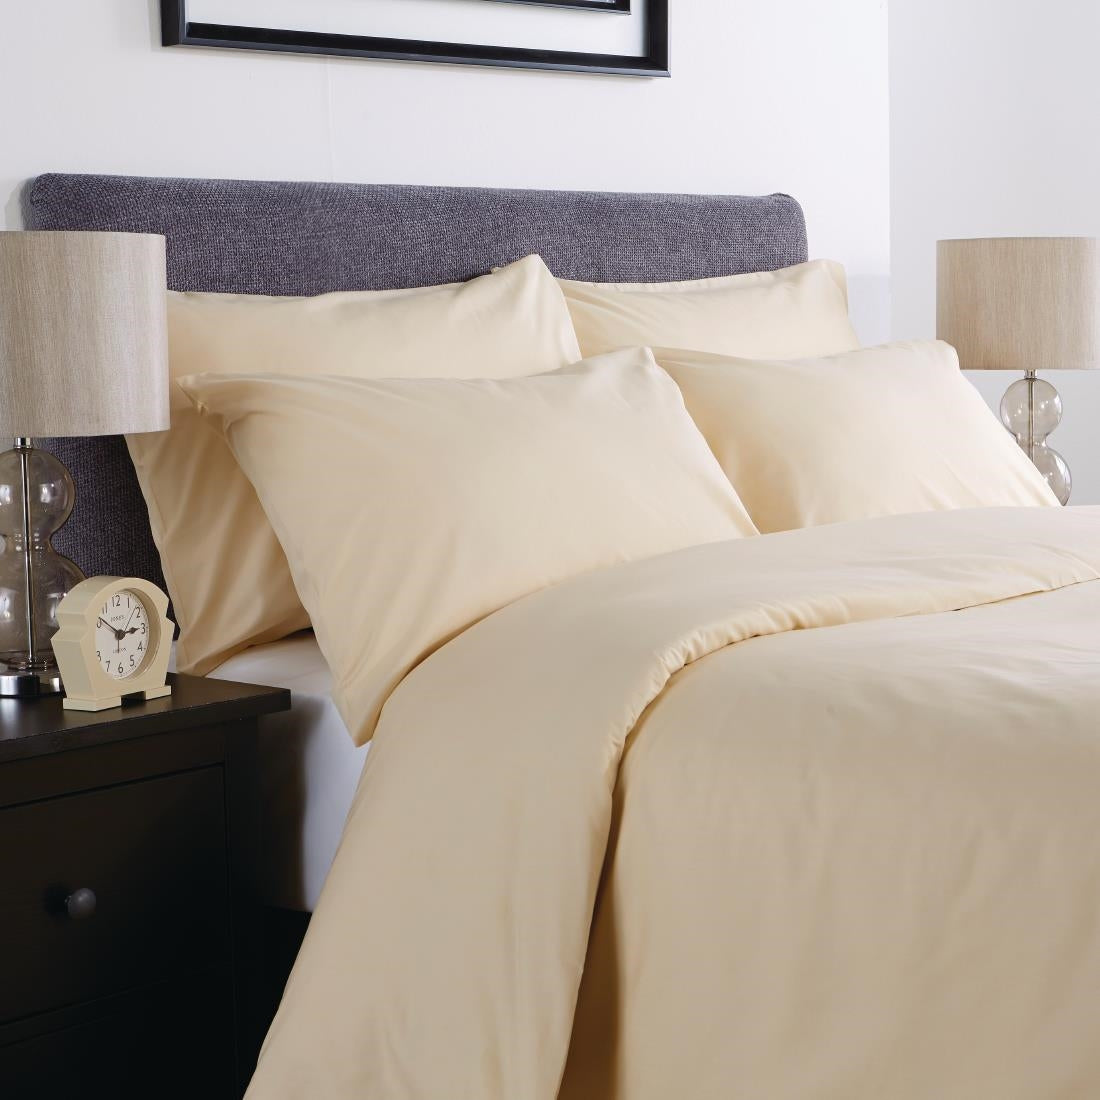 GU154 Mitre Comfort Percale Fitted Sheet Oatmeal Single